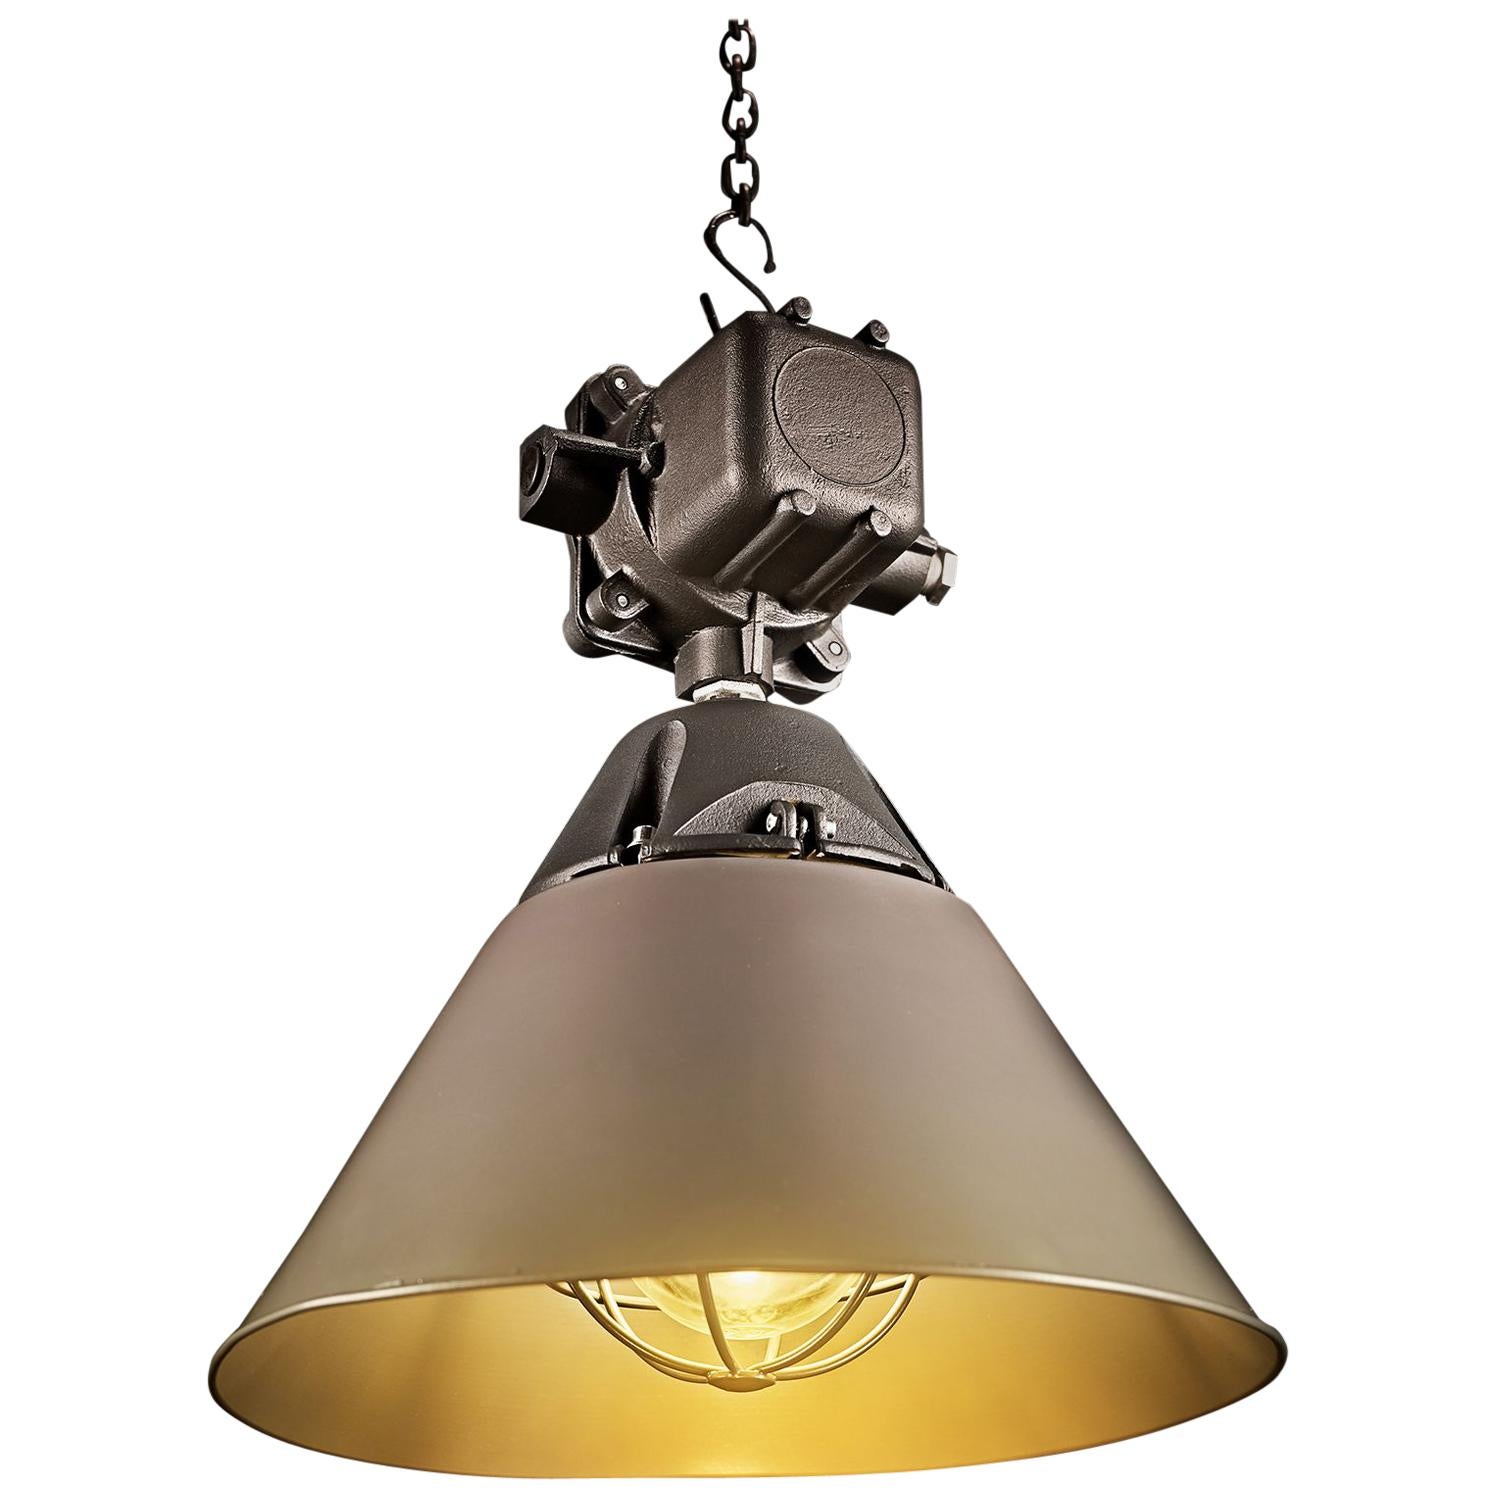 1970s OWP-125 Explosion-Proof Industrial Lamp For Sale